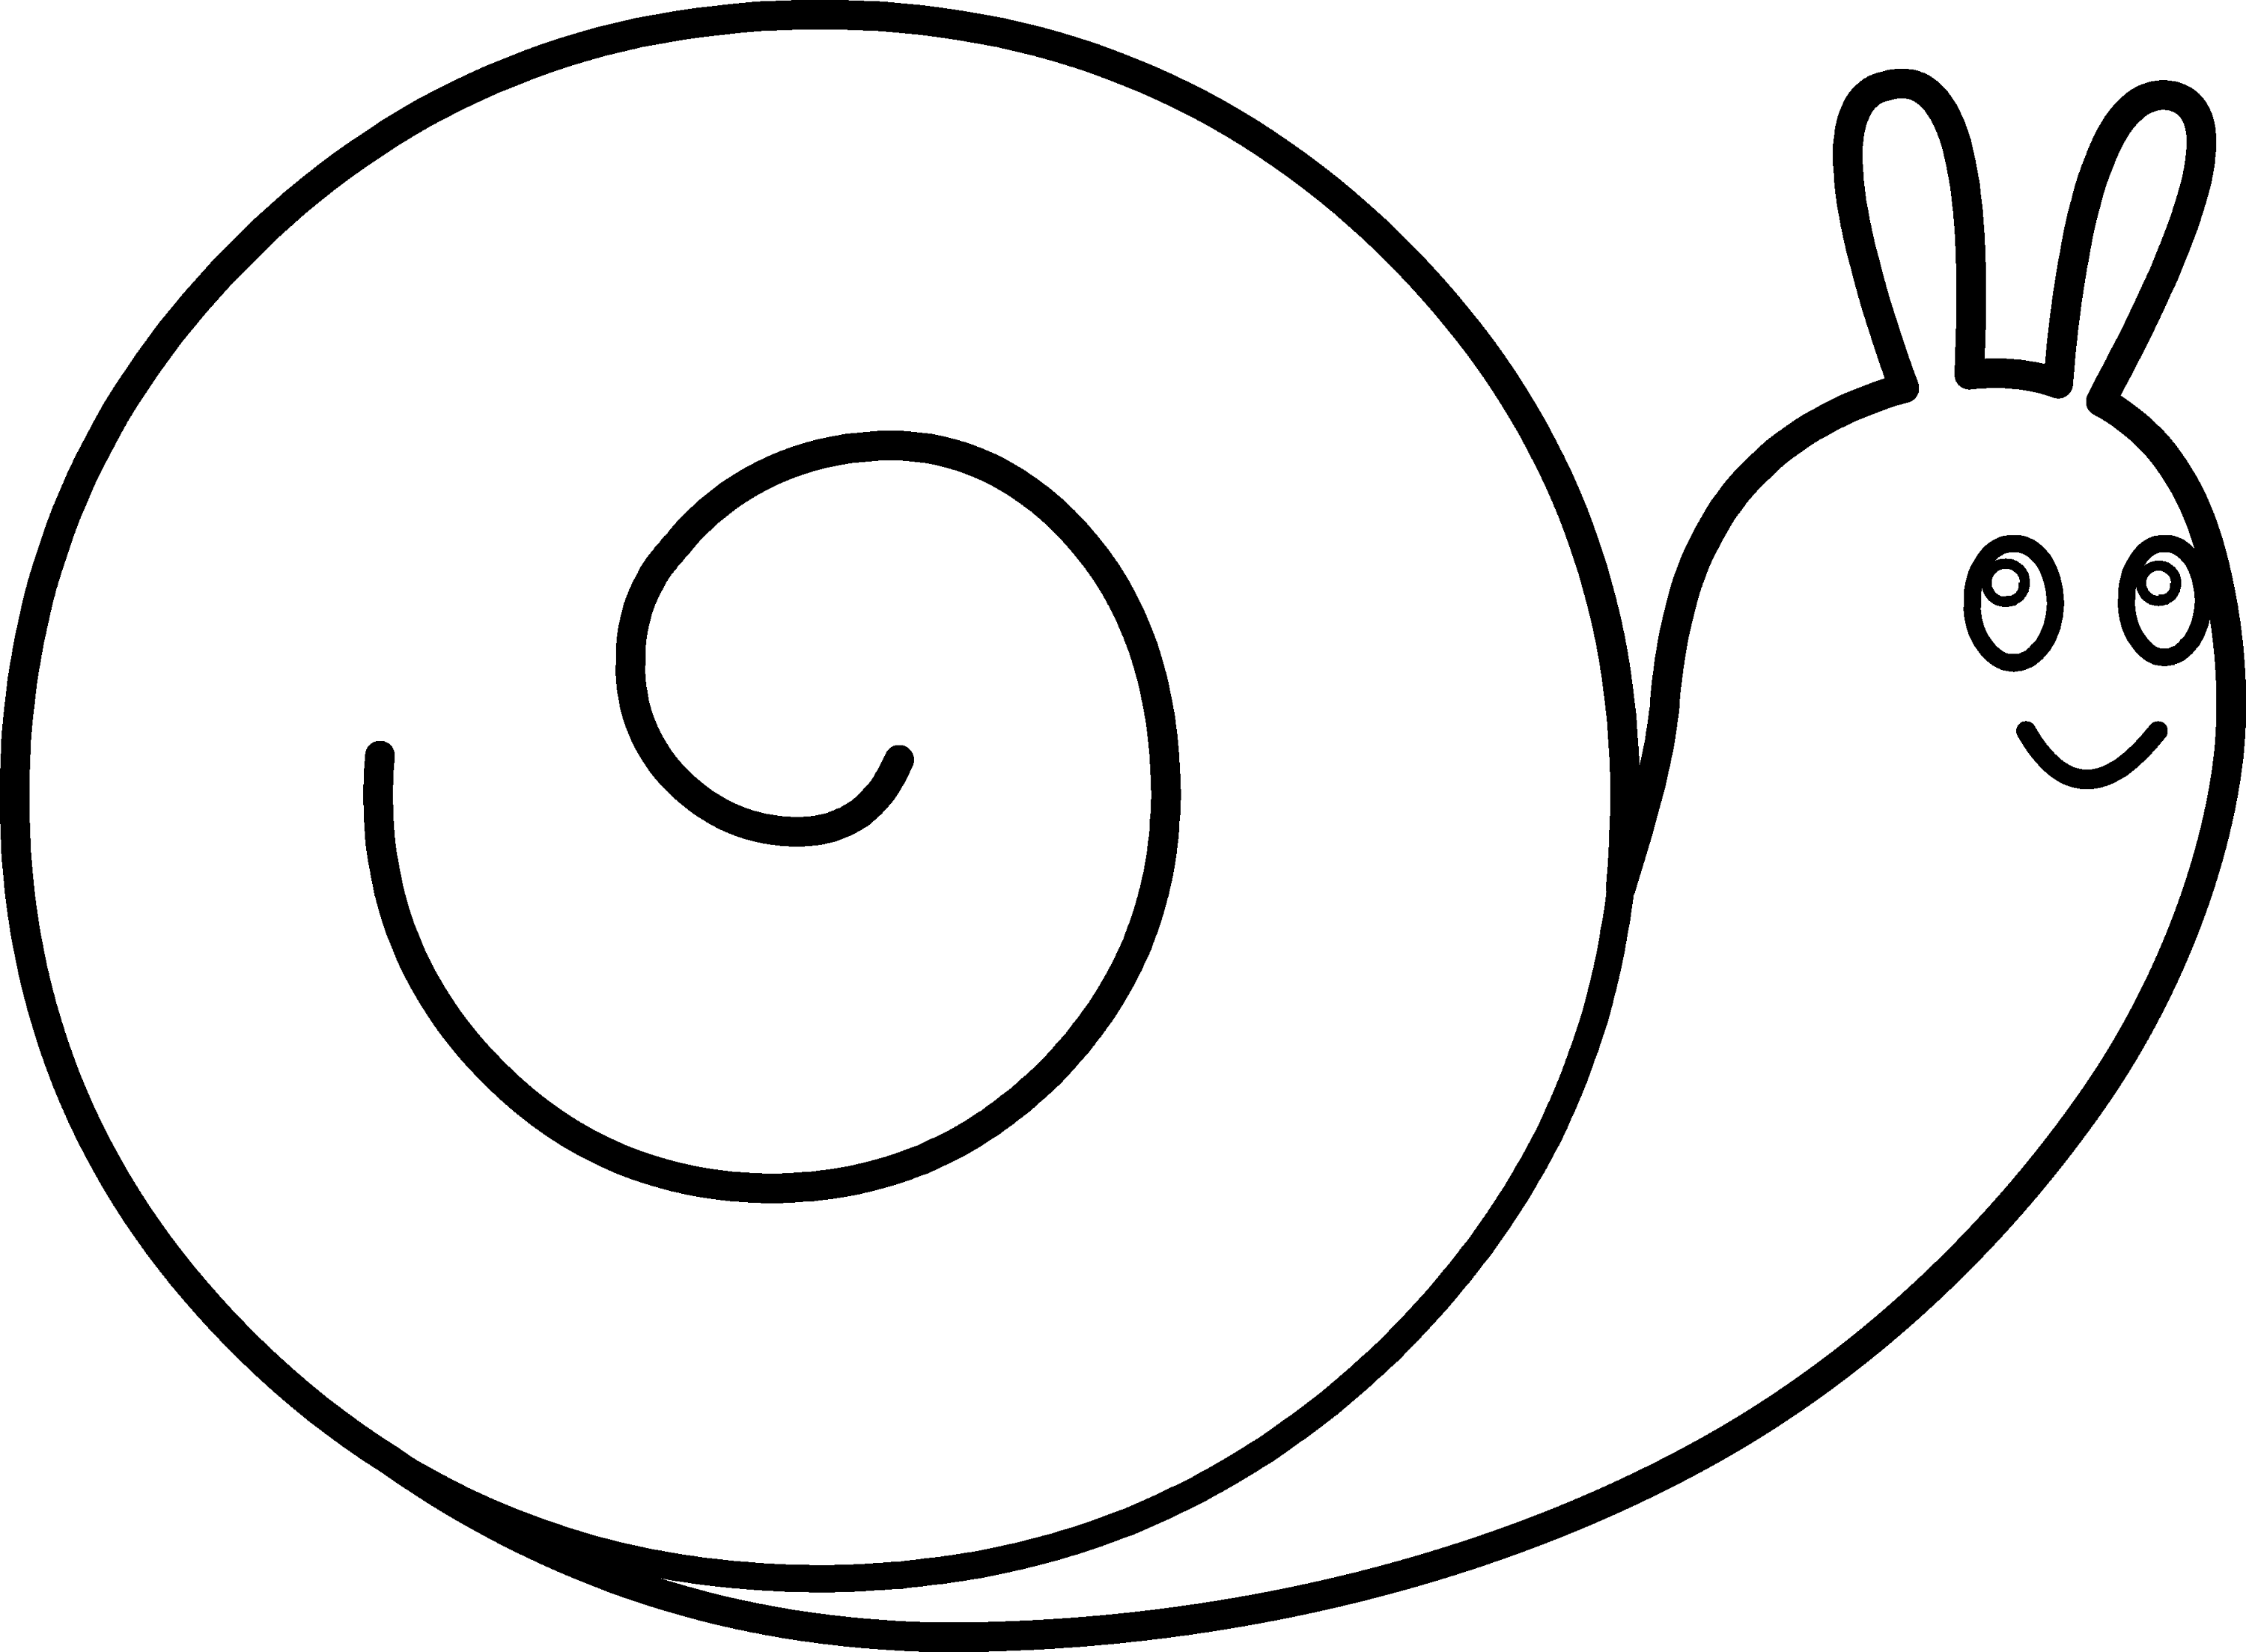 Cute Snail Coloring Page Free Clip Art